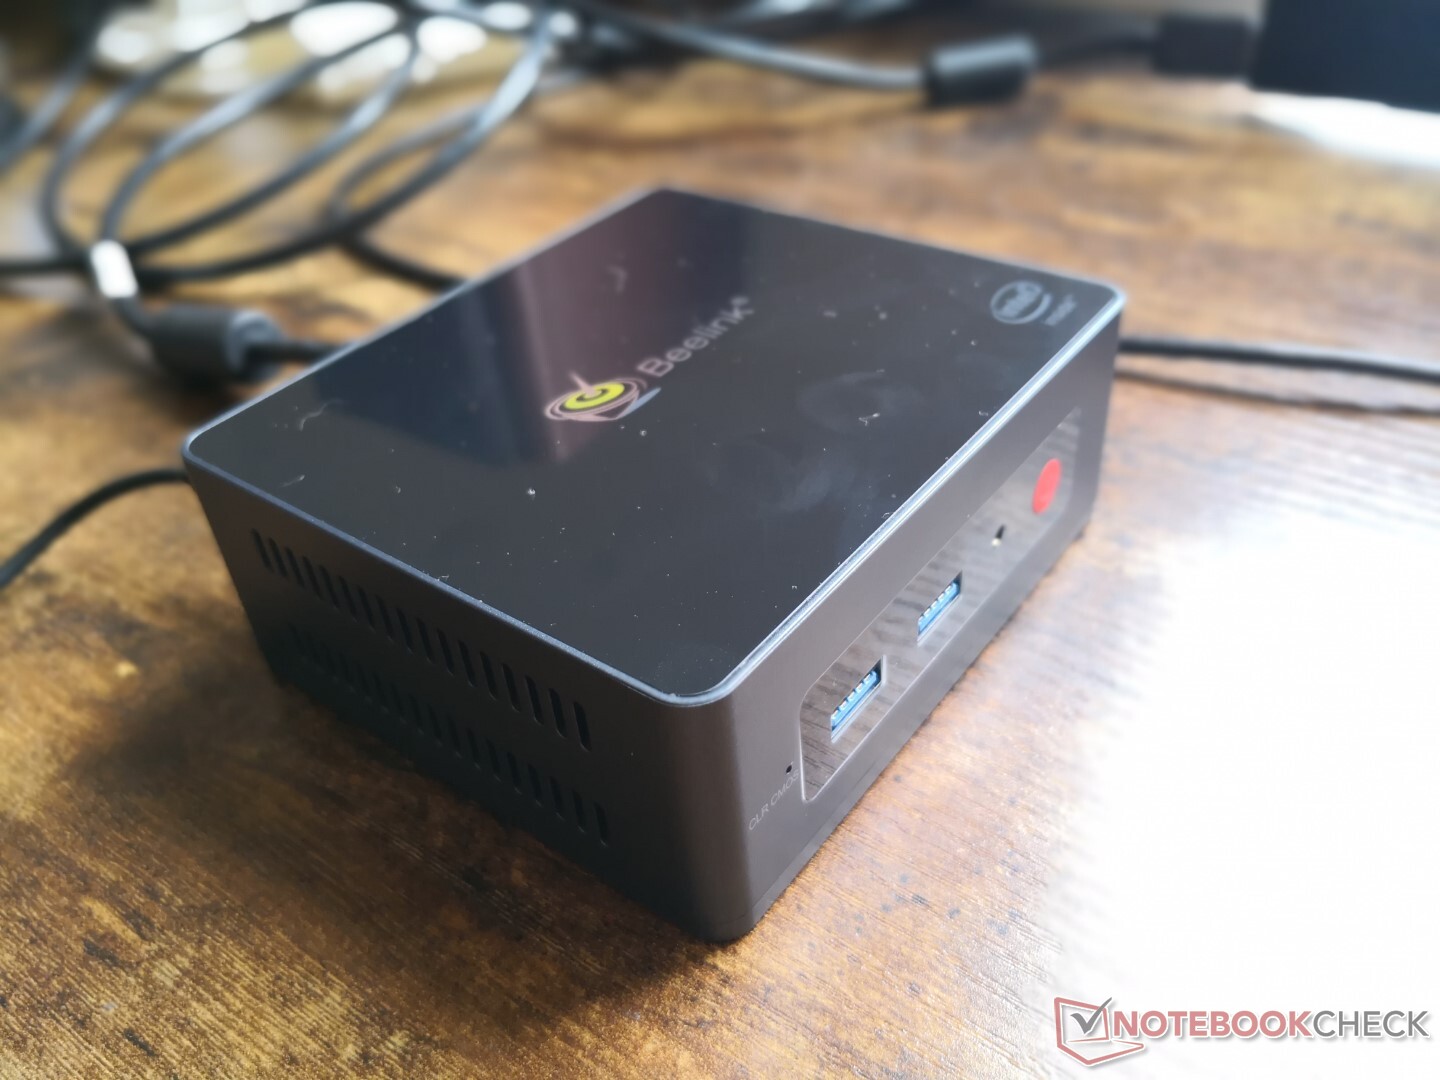 Beelink GK Mini PC is only $199 USD, comes with just the right